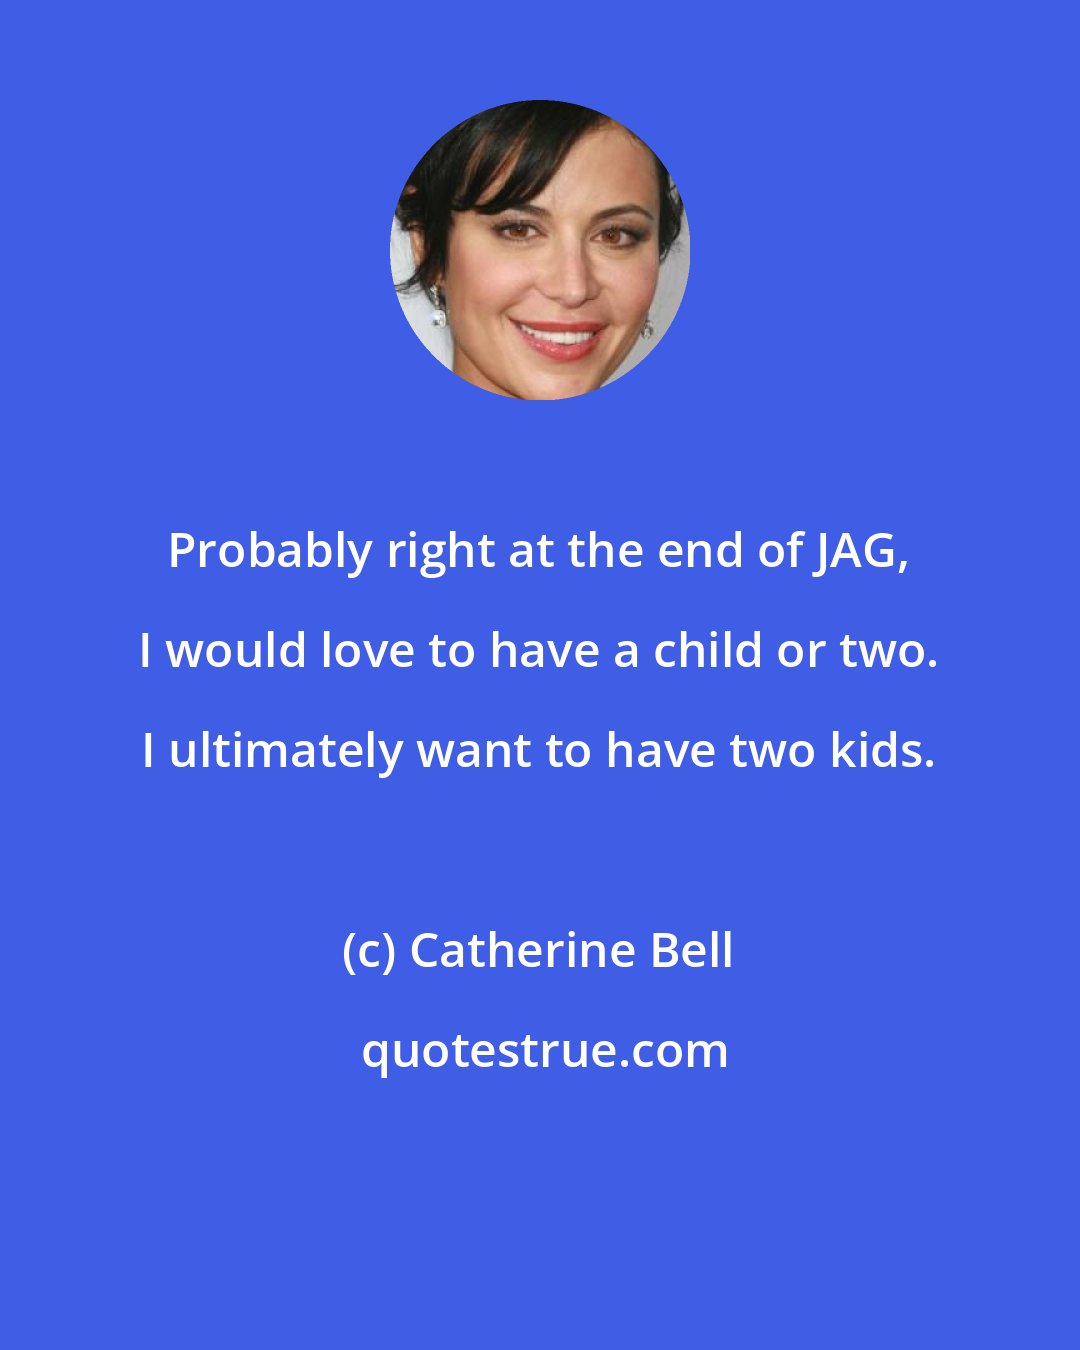 Catherine Bell: Probably right at the end of JAG, I would love to have a child or two. I ultimately want to have two kids.